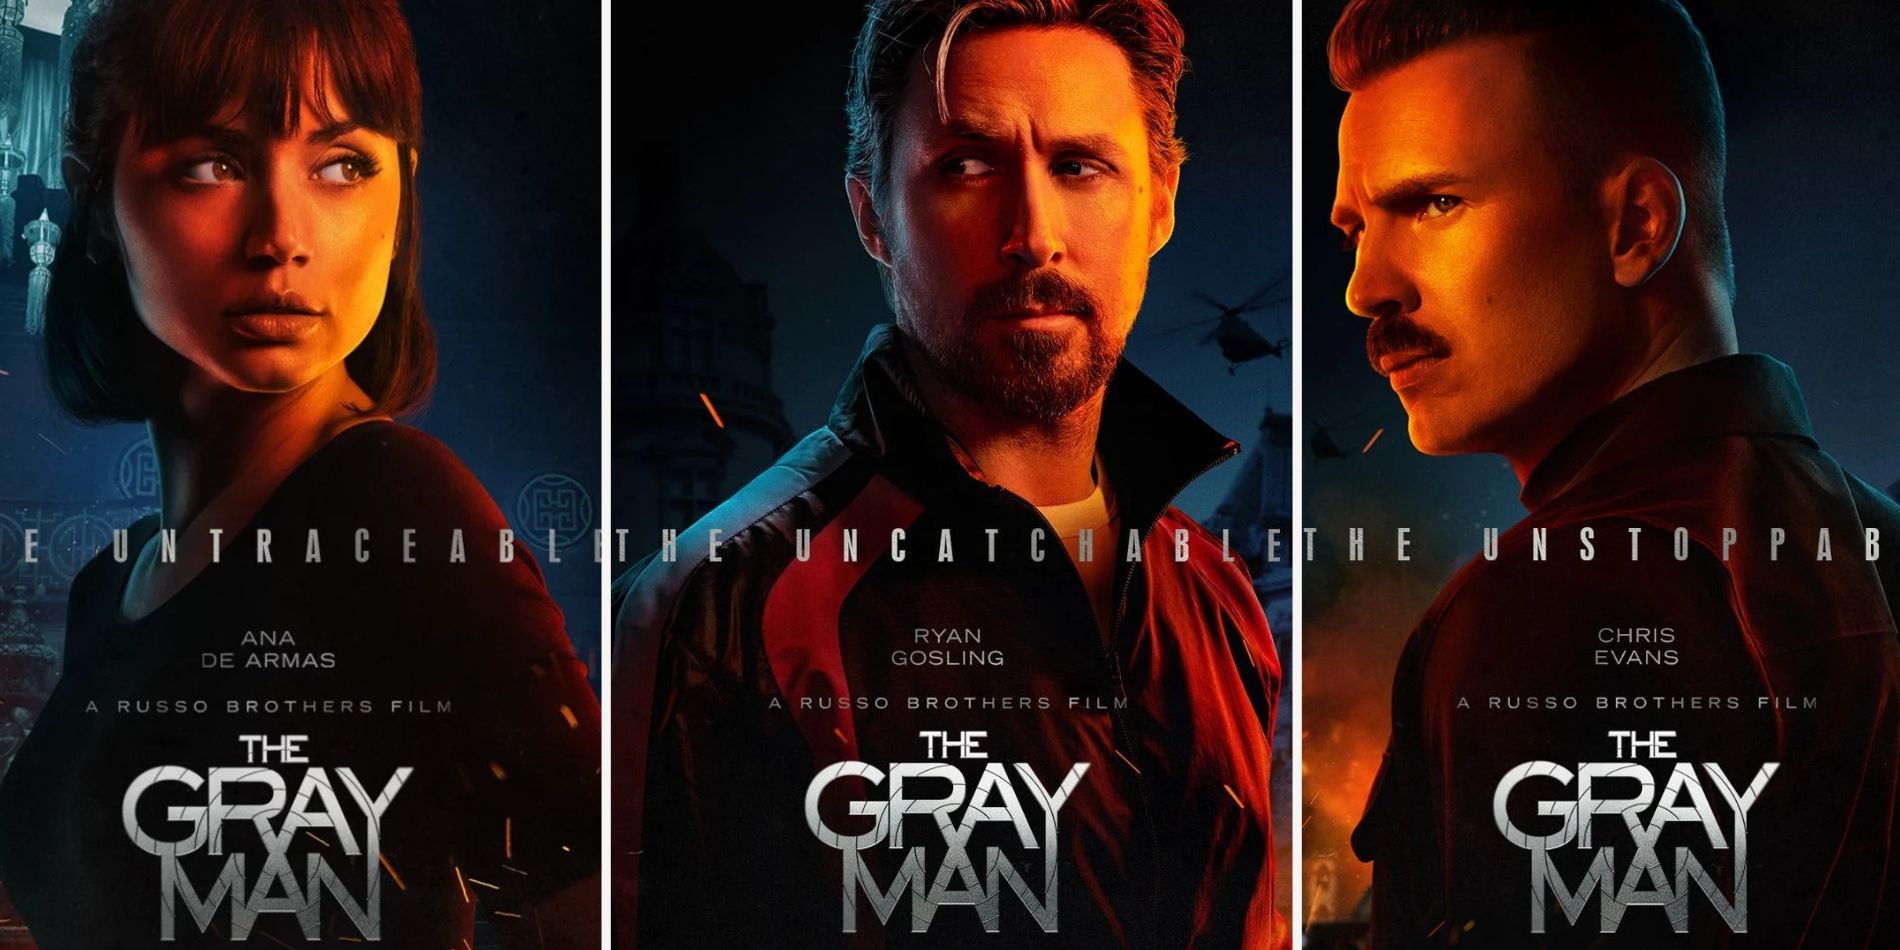 The Gray Man: The Problem With Netflix's Original Movies